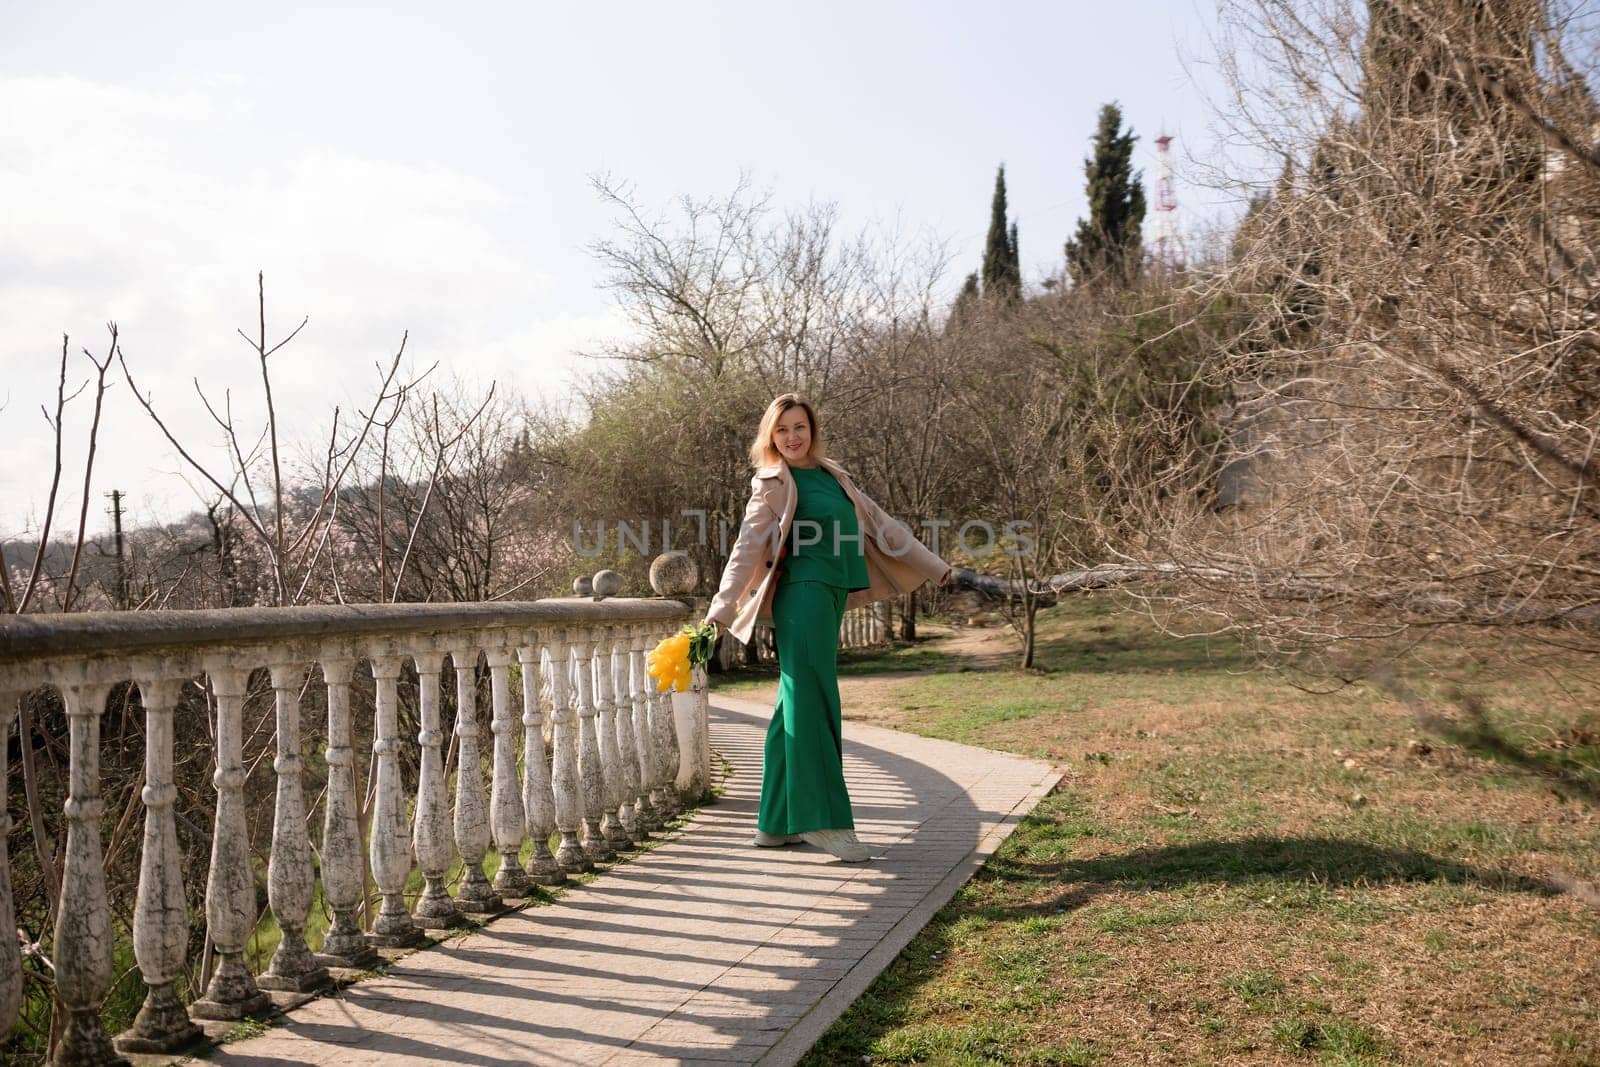 A woman in a green dress stands on a path next to a railing. She is holding a yellow bag and a yellow flower. The scene is peaceful and serene, with the woman posing for a photo